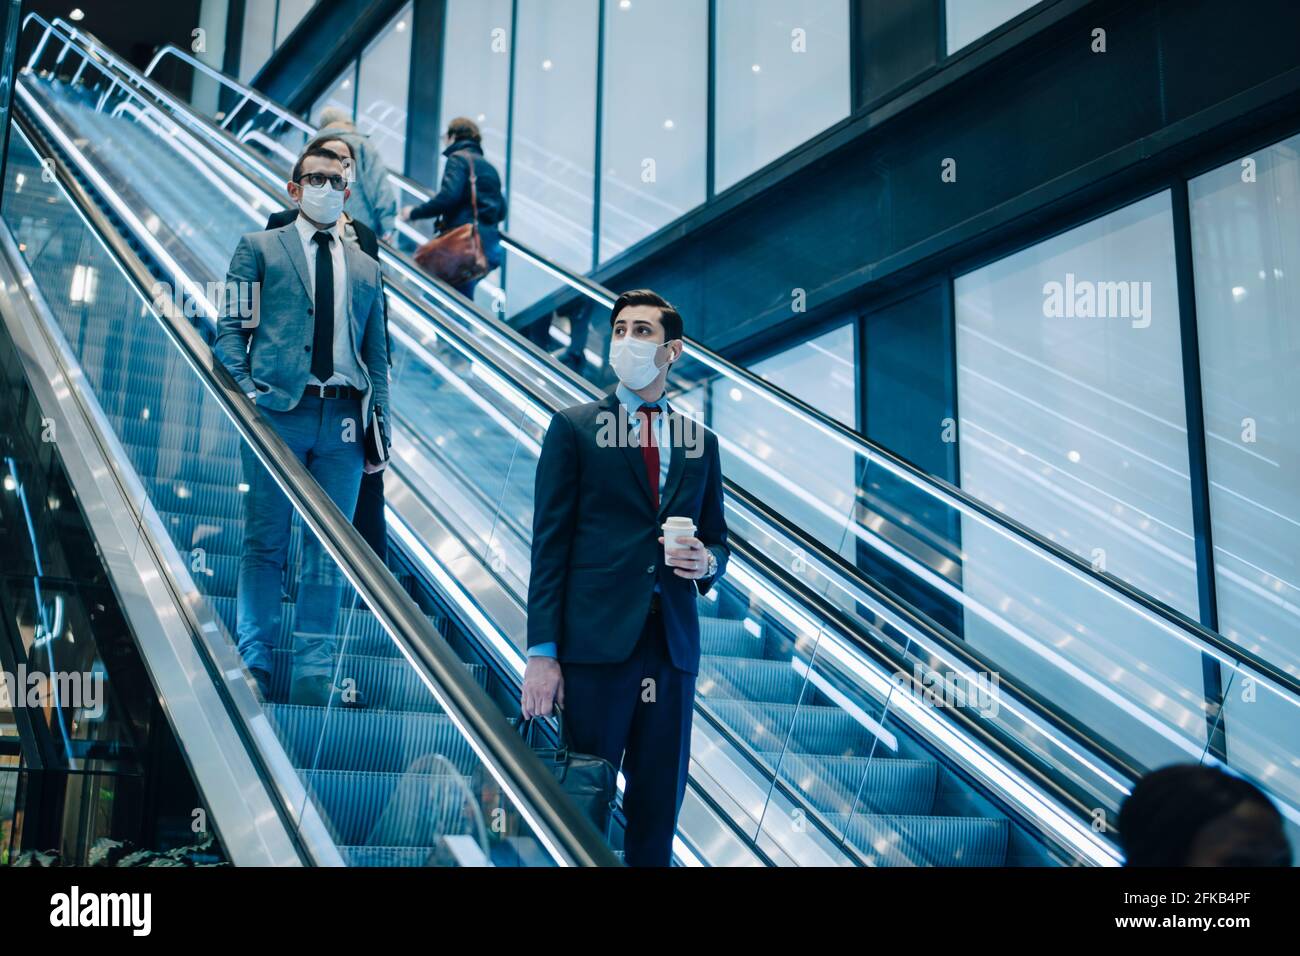 Business people moving down on escalator during pandemic Stock Photo